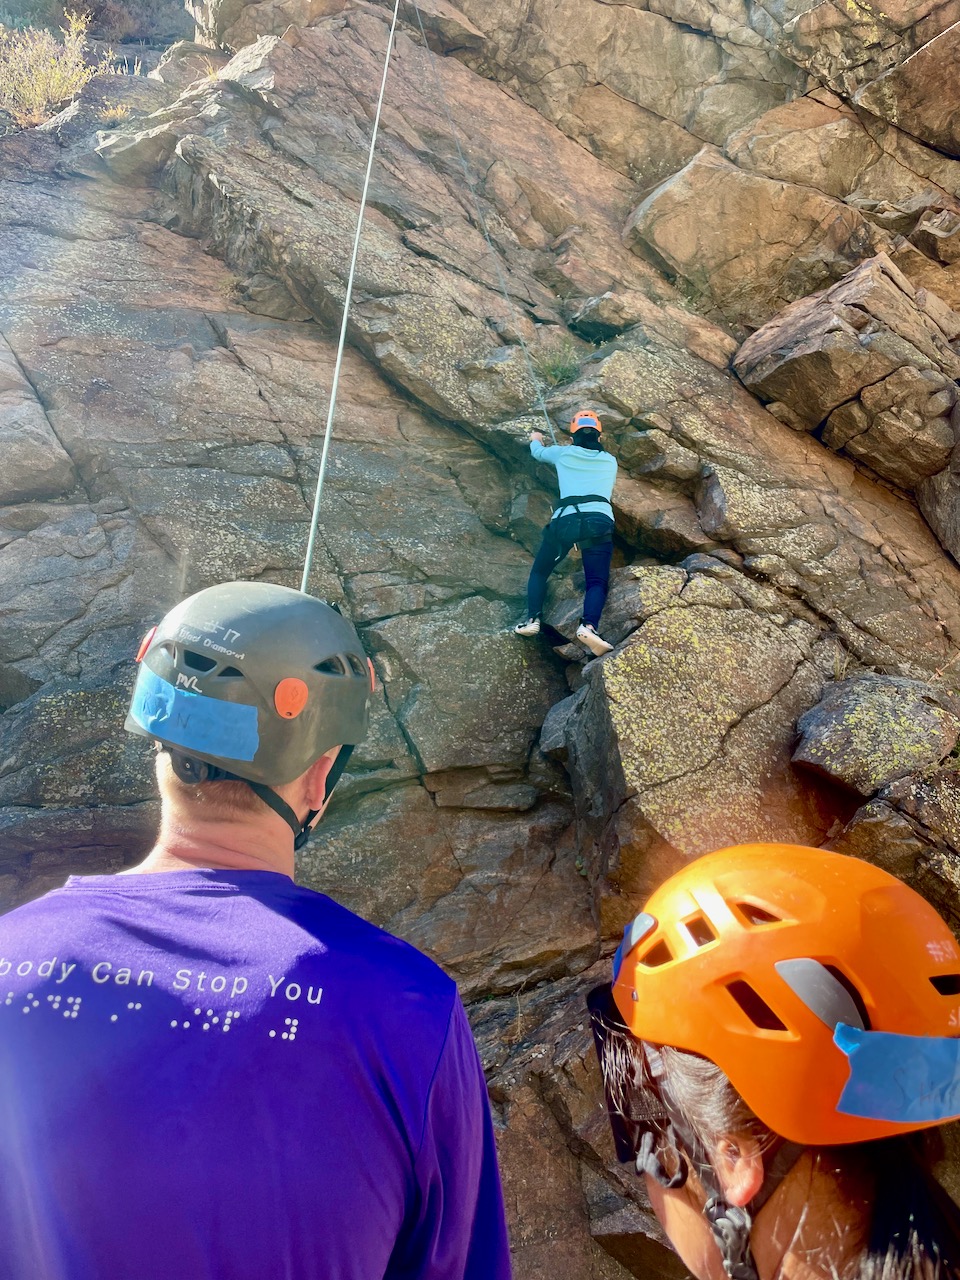 Ryan holds the belay rope for a student seen above on the rock. His t-shirt says “Nobody Can Stop You” in print and Braille.